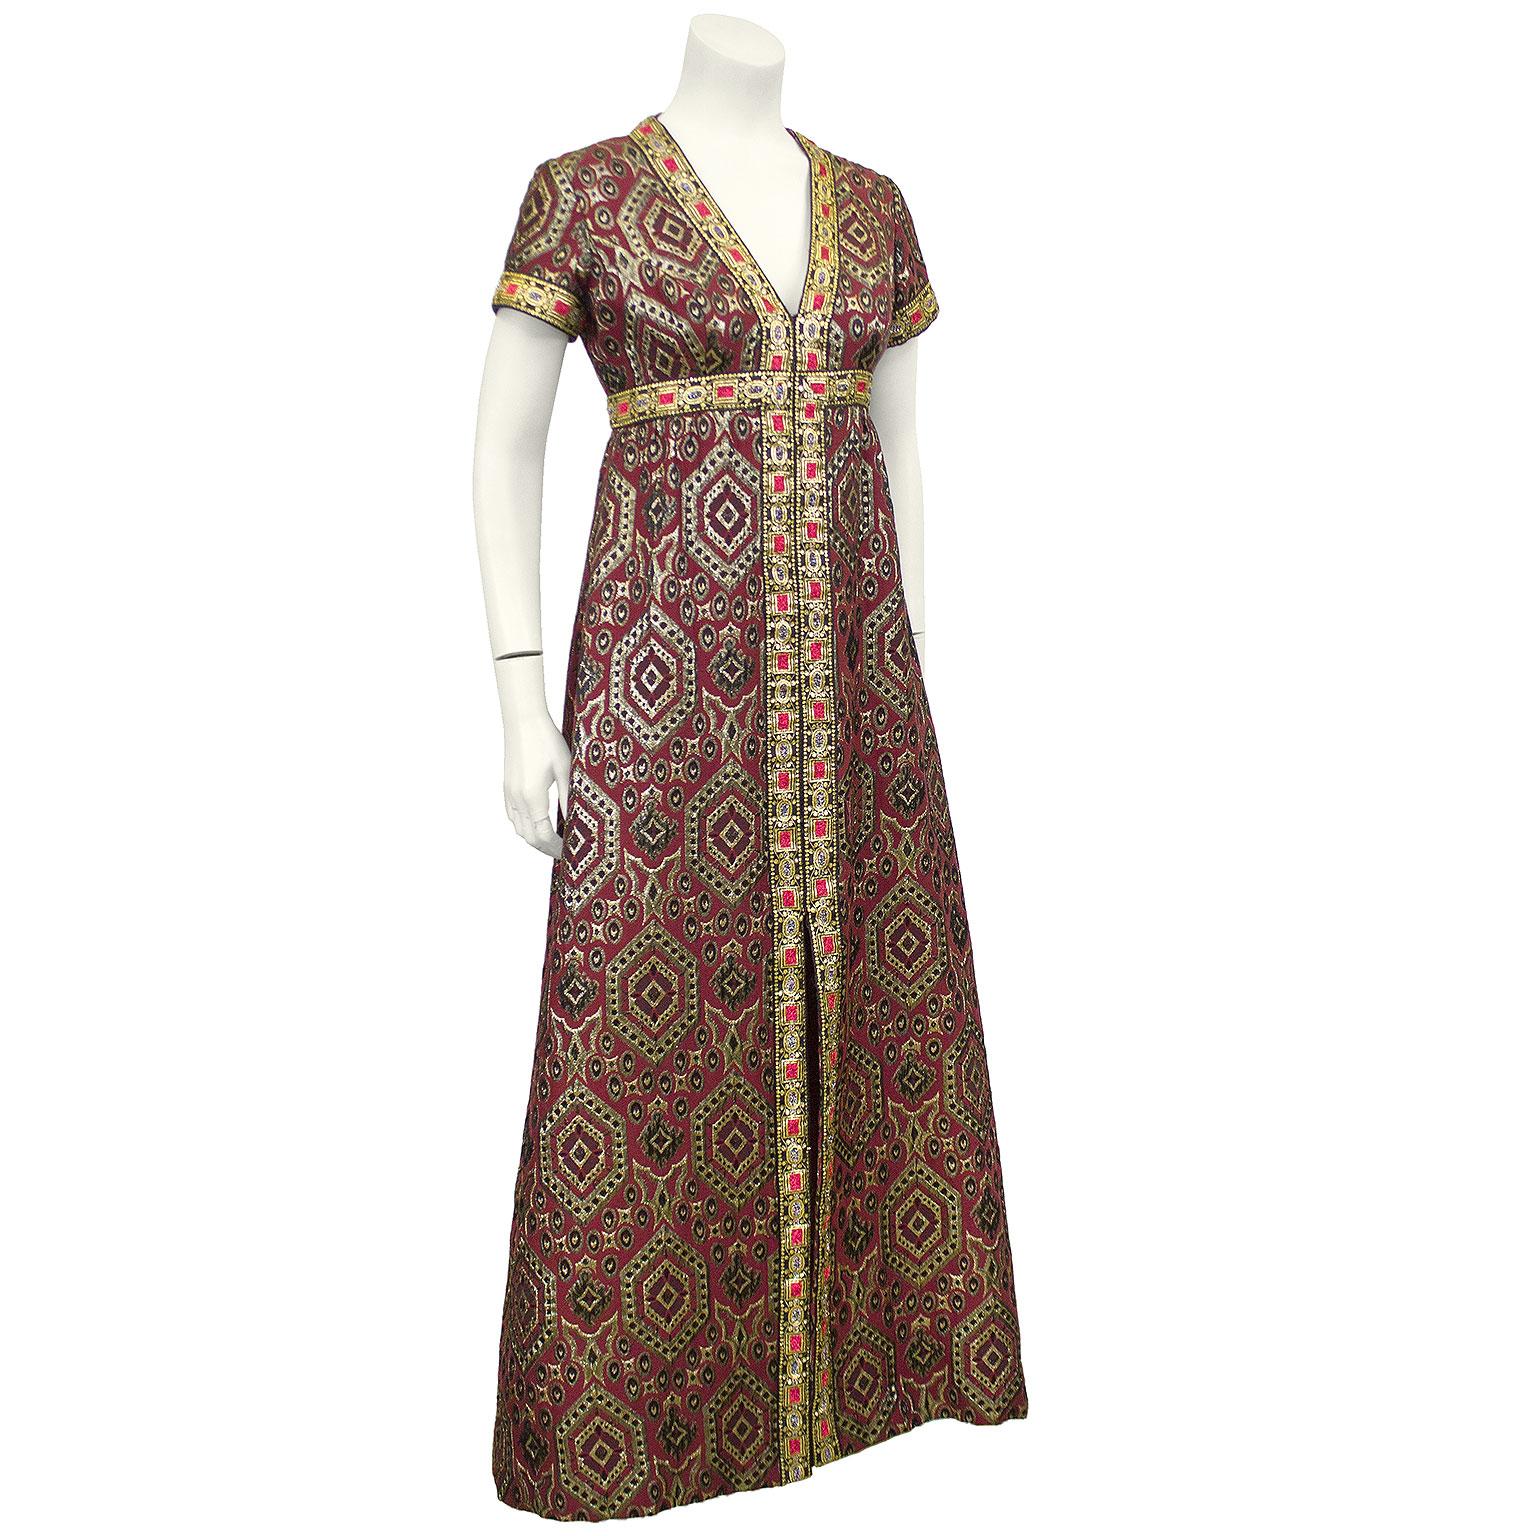 Although no label is found I am confident this dress can be attributed  to Oscar de la Renta. Having sold many of his gowns from the same era, this gown is a real ODL showstopper. Made from a heavy burgundy brocade with an intricate gold, silver and